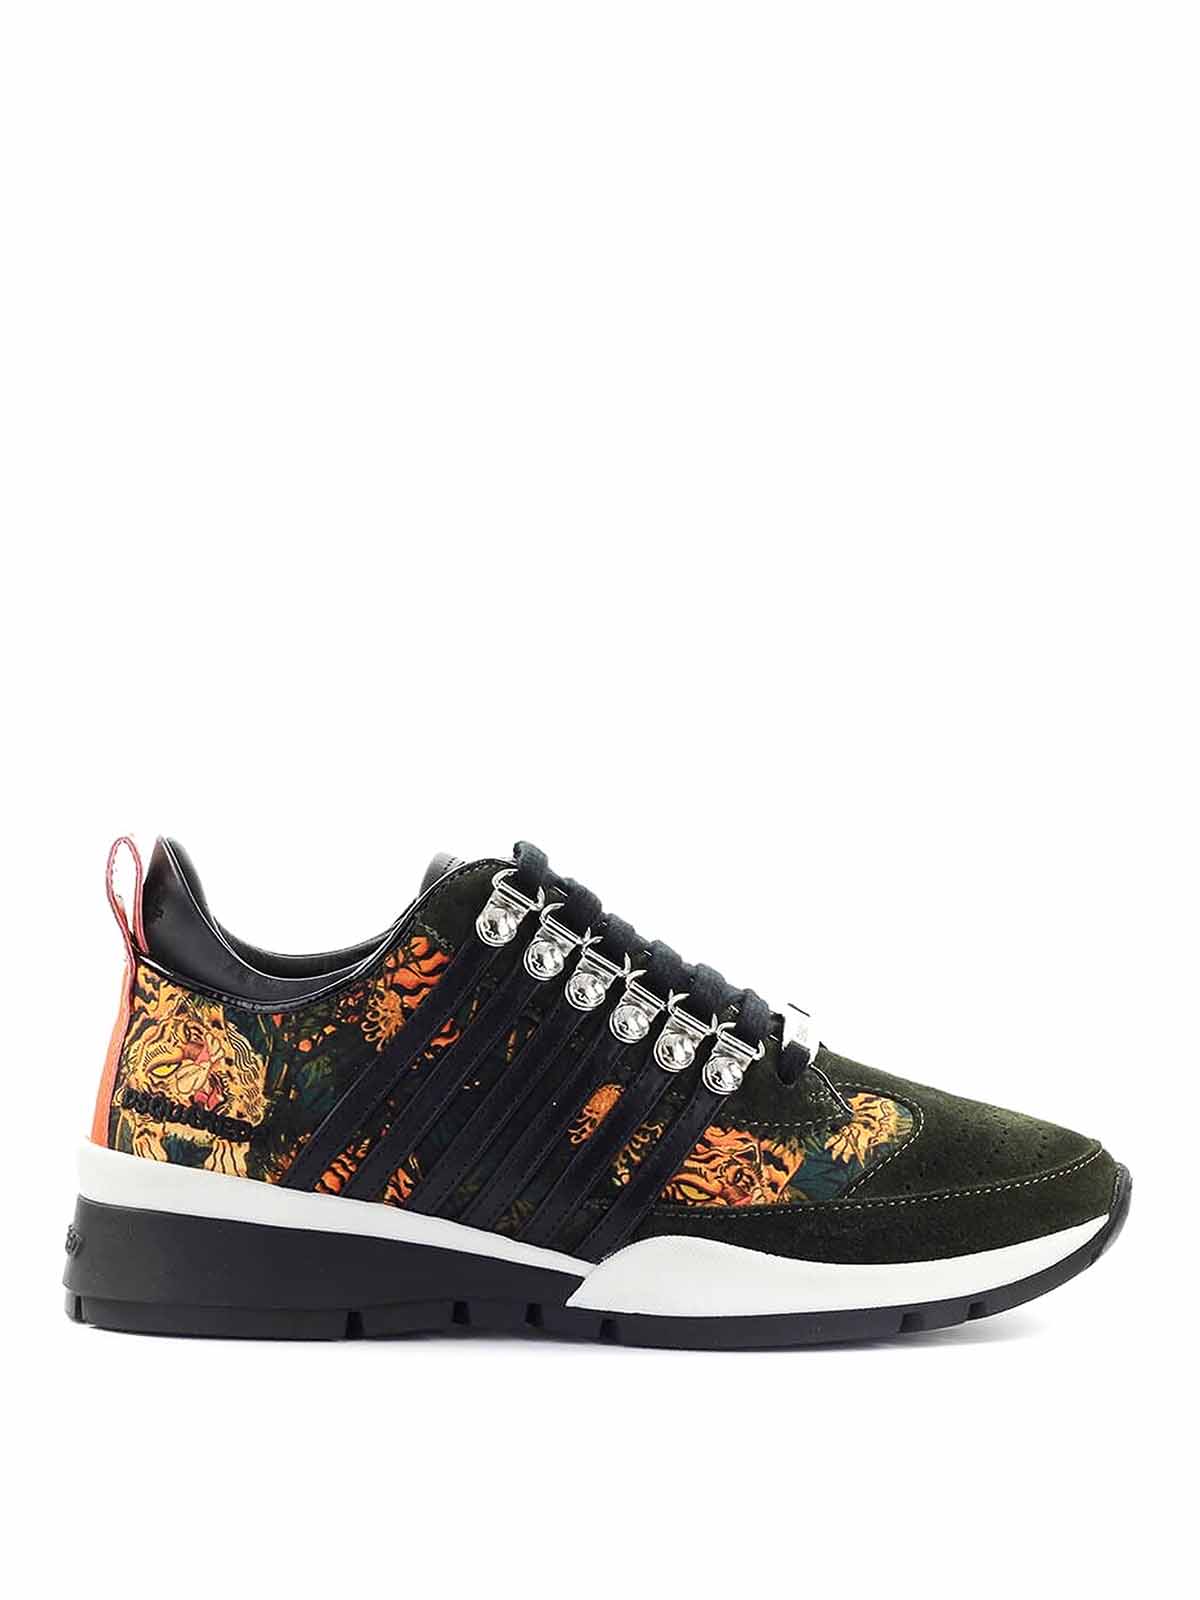 DSQUARED2 251 TIGER PRINT trainers